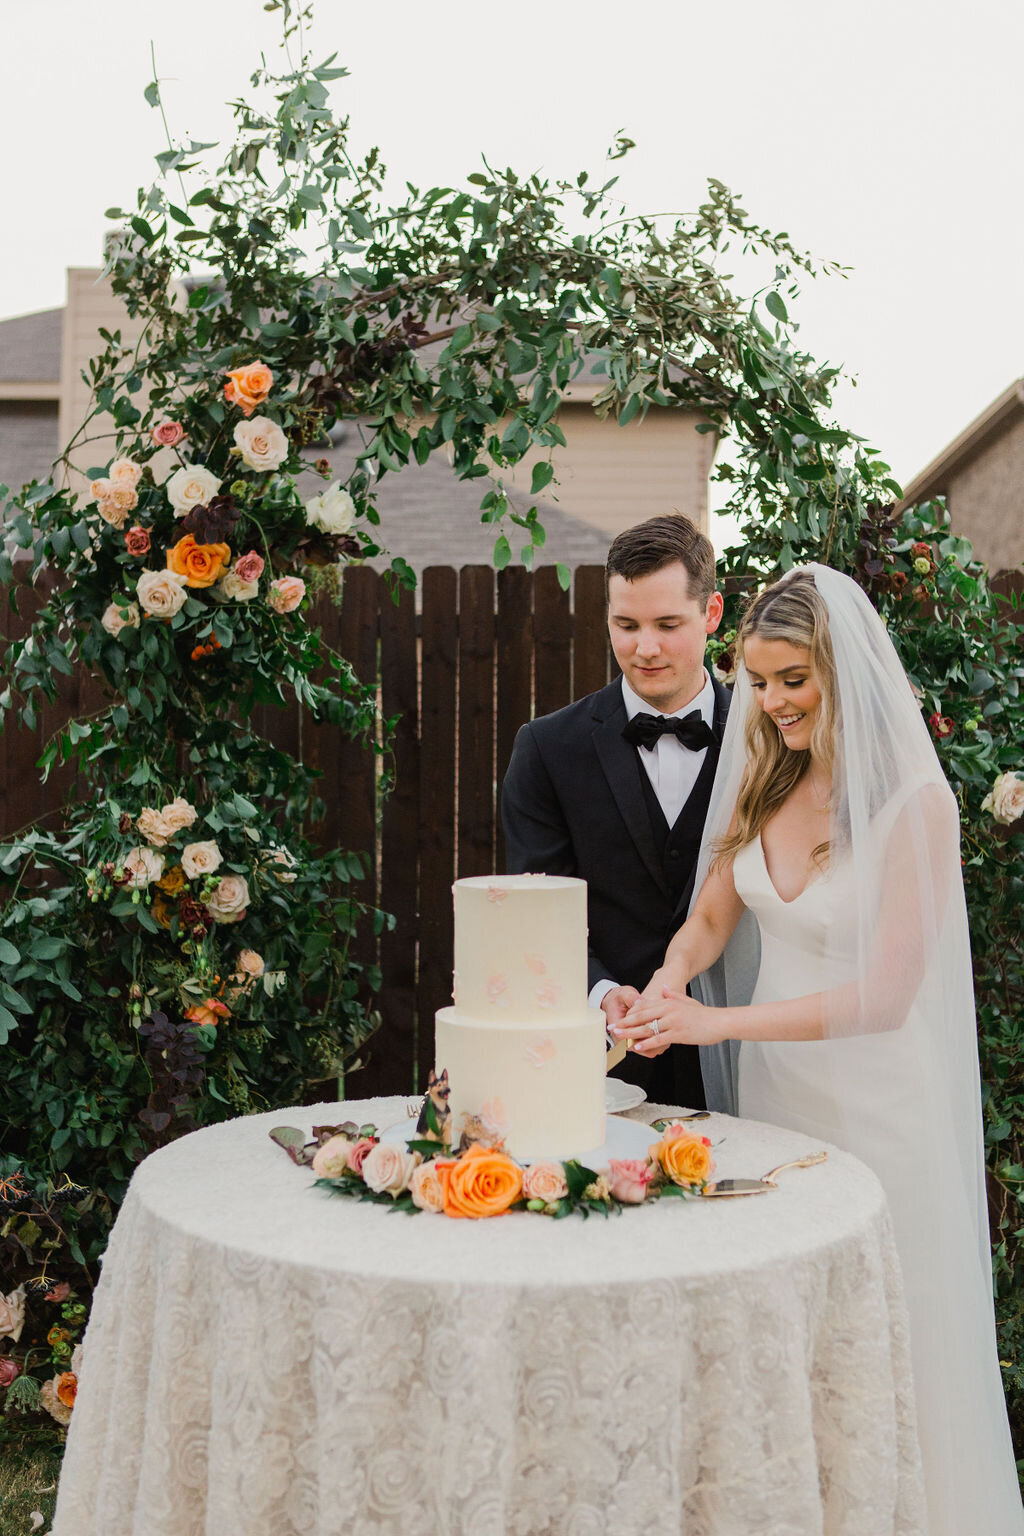 Cake Cutting at Intimate Ceremony in Dallas Forth Worth, Texas with Floral Arch by Vella Nest Floral Design